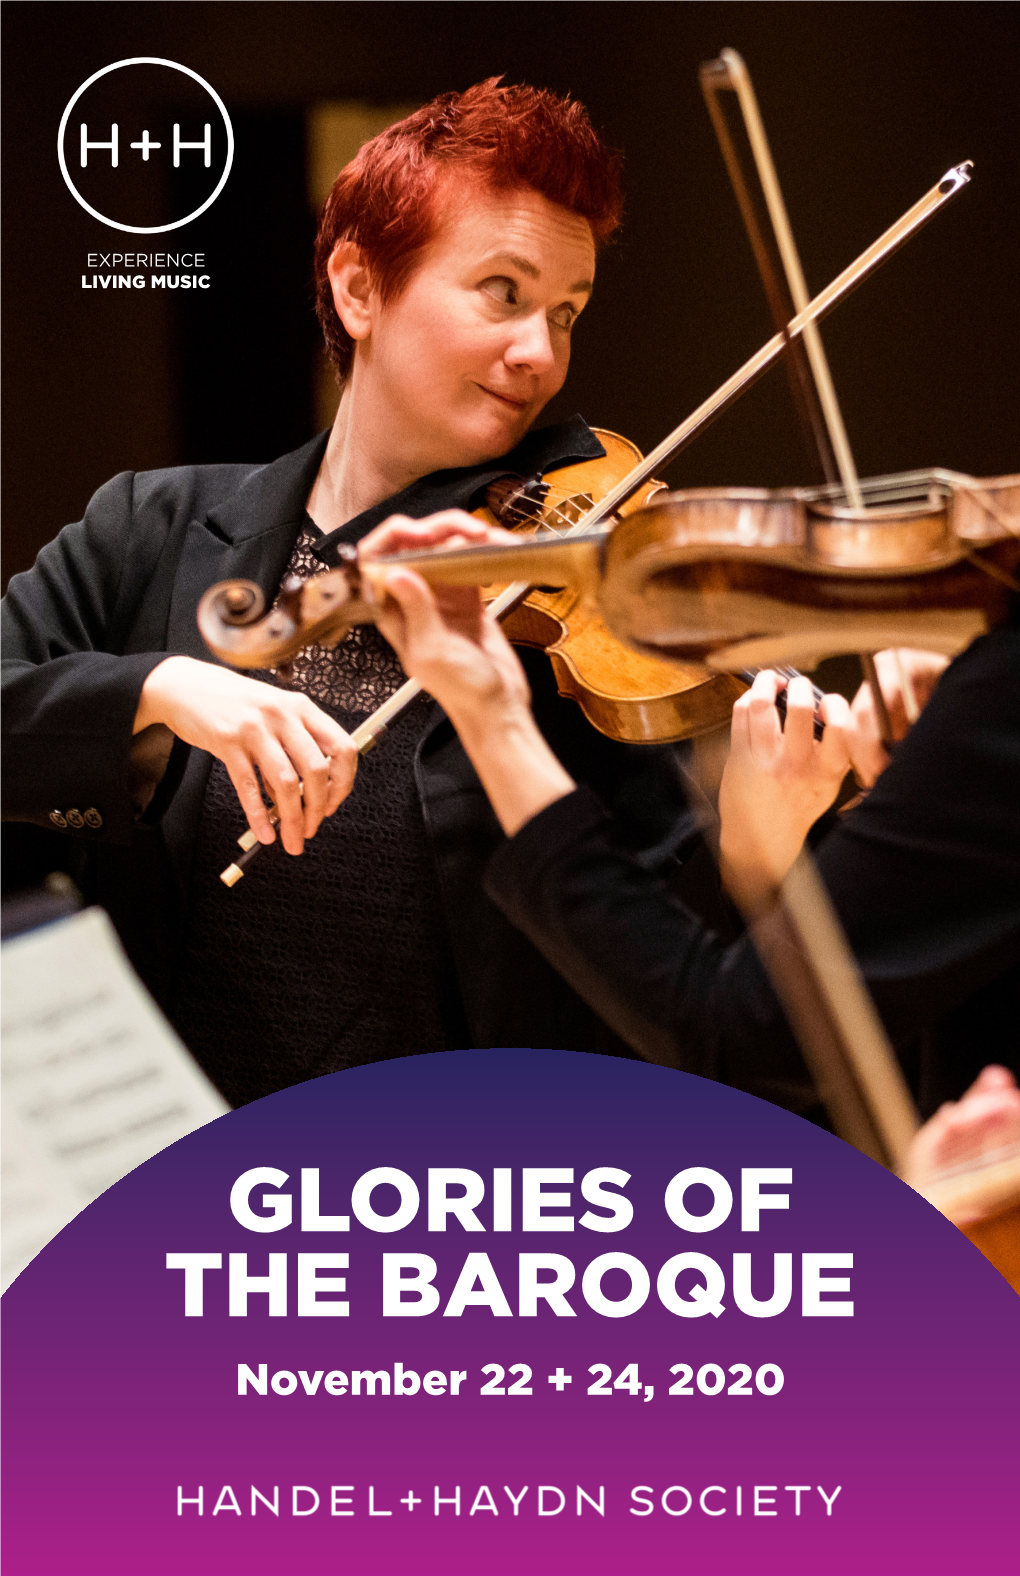 GLORIES of the BAROQUE November 22 + 24, 2020 GLORIES of the BAROQUE November 22 + 24, 2020 at 3:00PM 2,523Rd Concert St